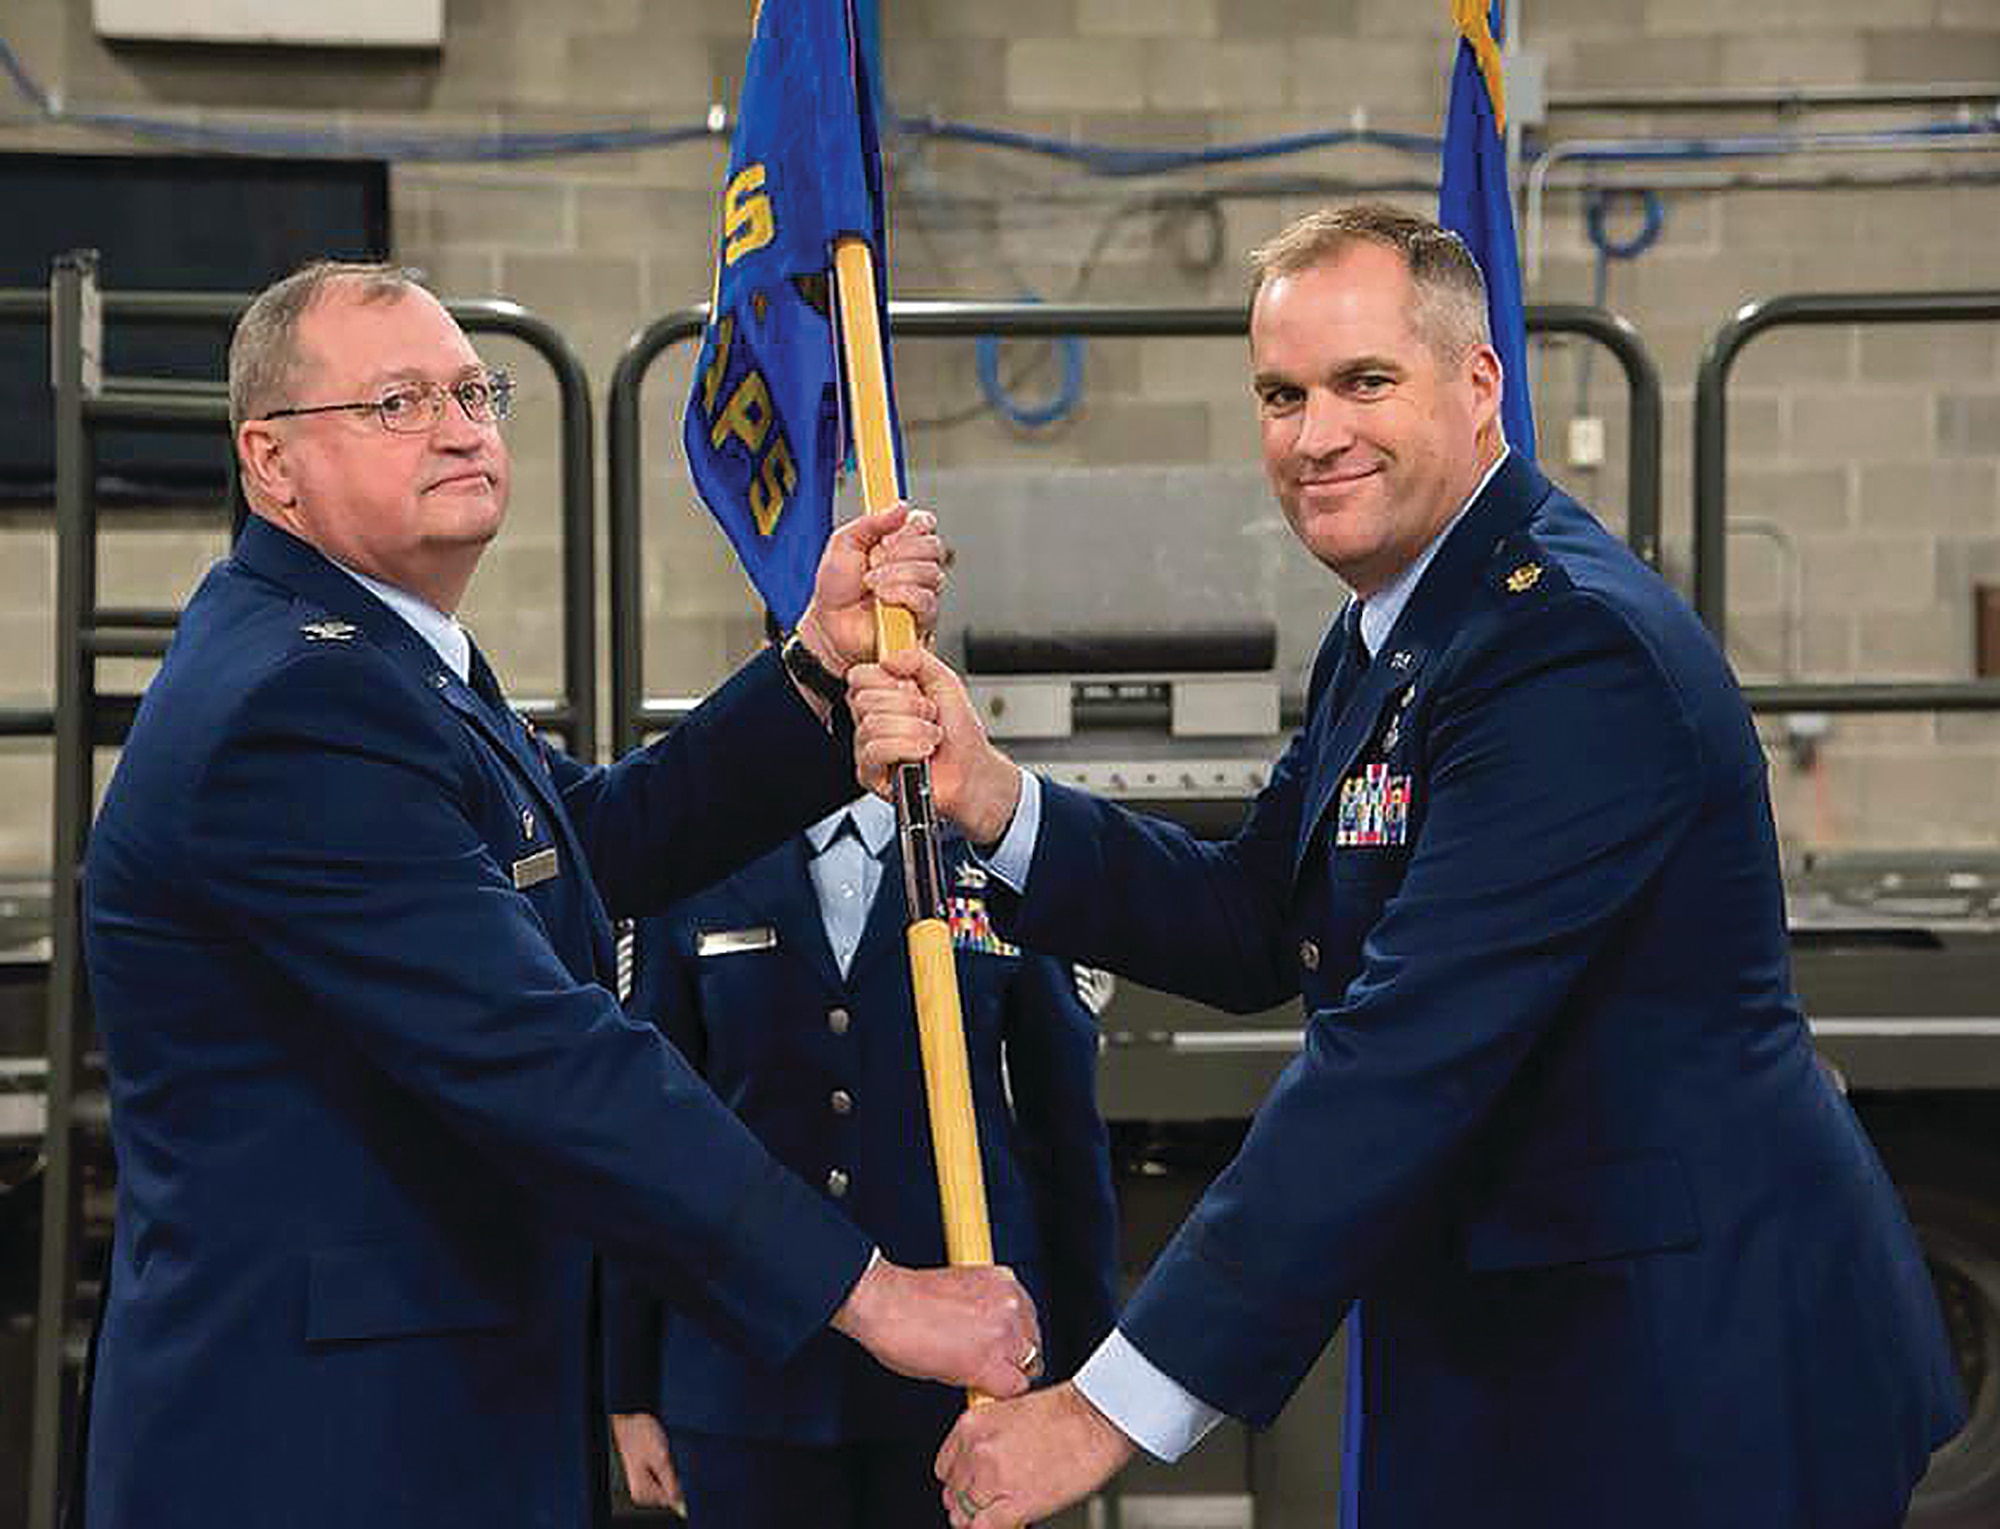 Col. Bryan Runion, 445th Mission Support Group commander, passes the guidon to Maj. David Borden, incoming 87th Aerial Port Squadron commander, during the January 6, 2018 change-of command ceremony